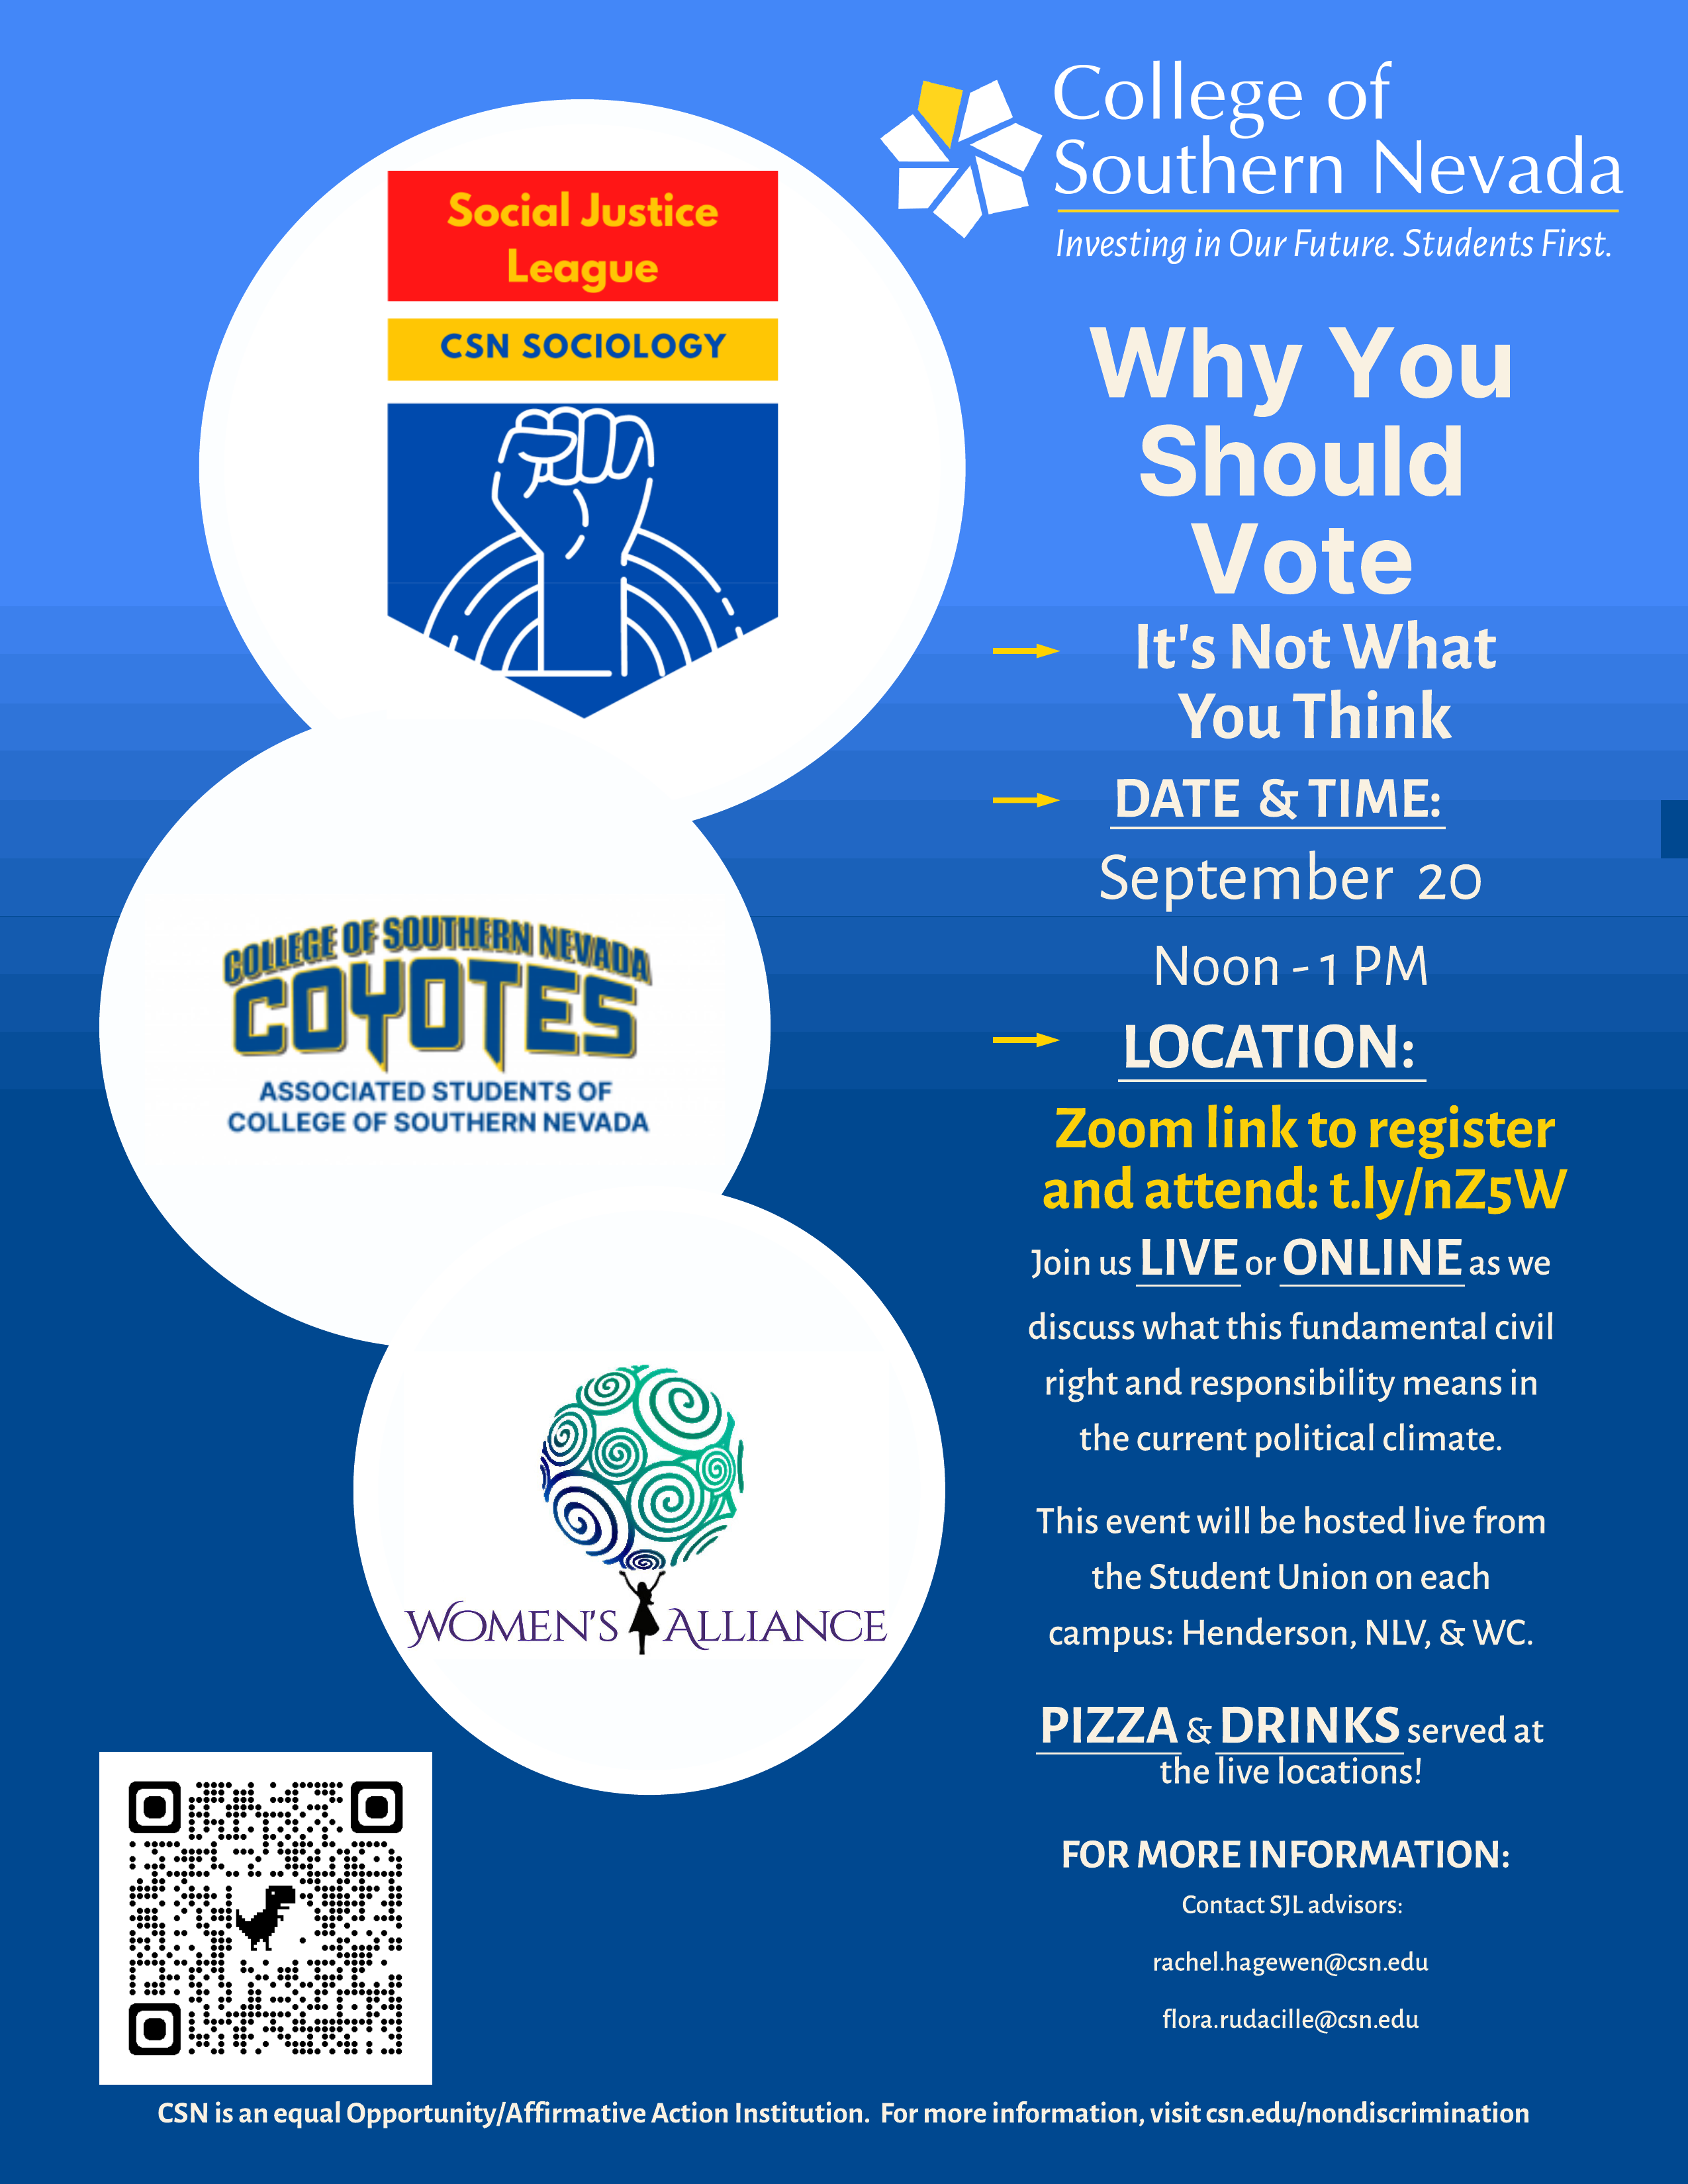 Why you should vote, it's not what you think learn more at the September 20 event 